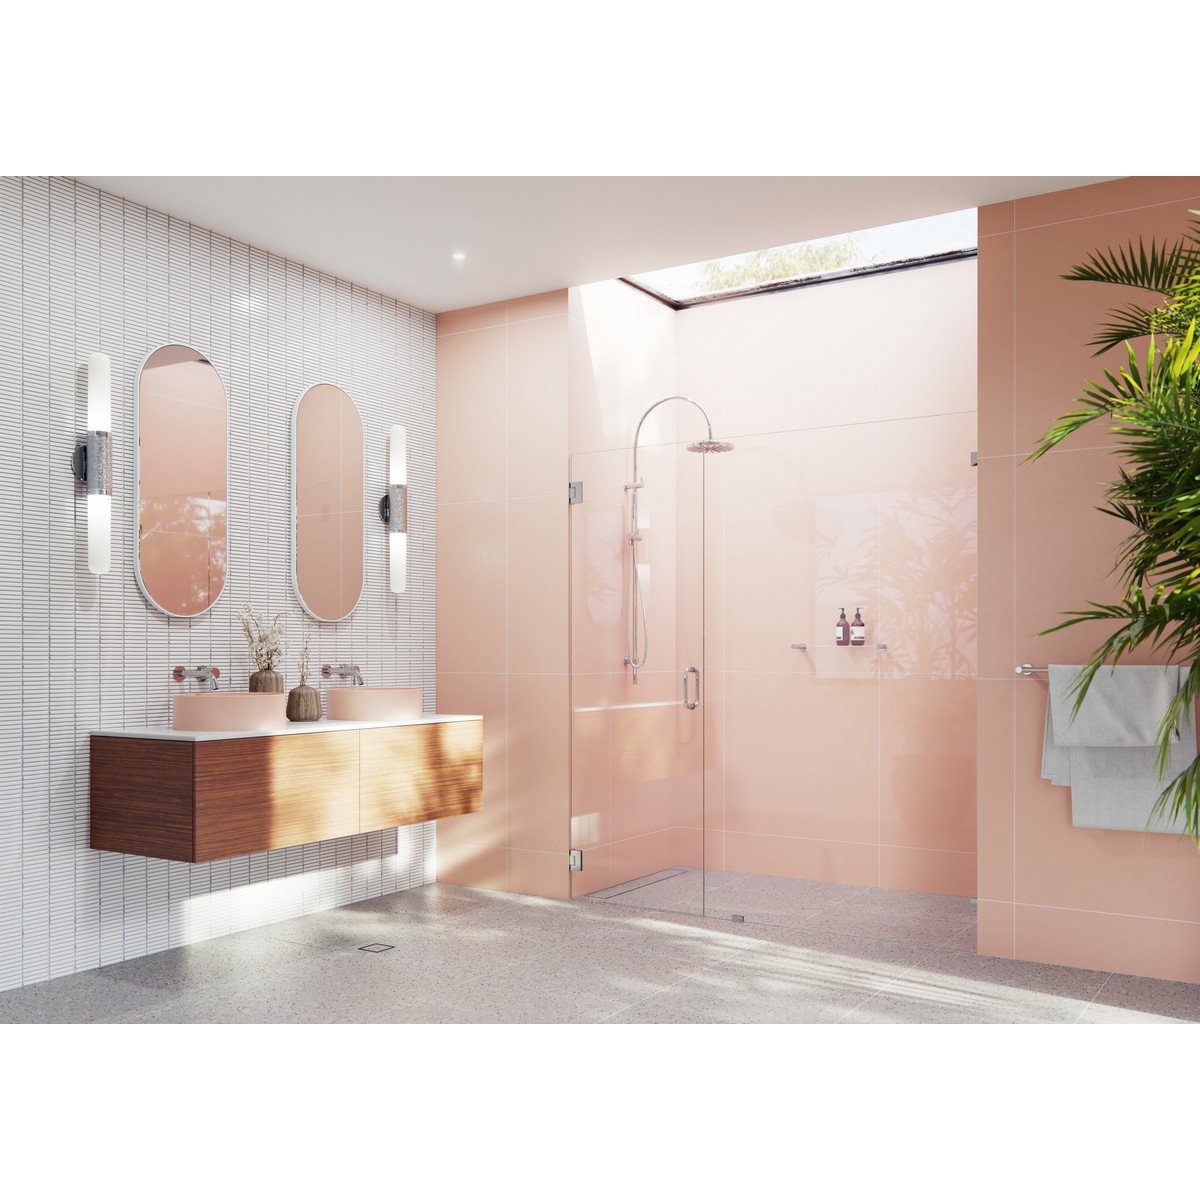 GLASS WAREHOUSE GW-WH-68.75 ILLUME 68 3/4 W X 78 H WALL HINGED FULLY FRAMELESS GLASS SHOWER ENCLOSURE